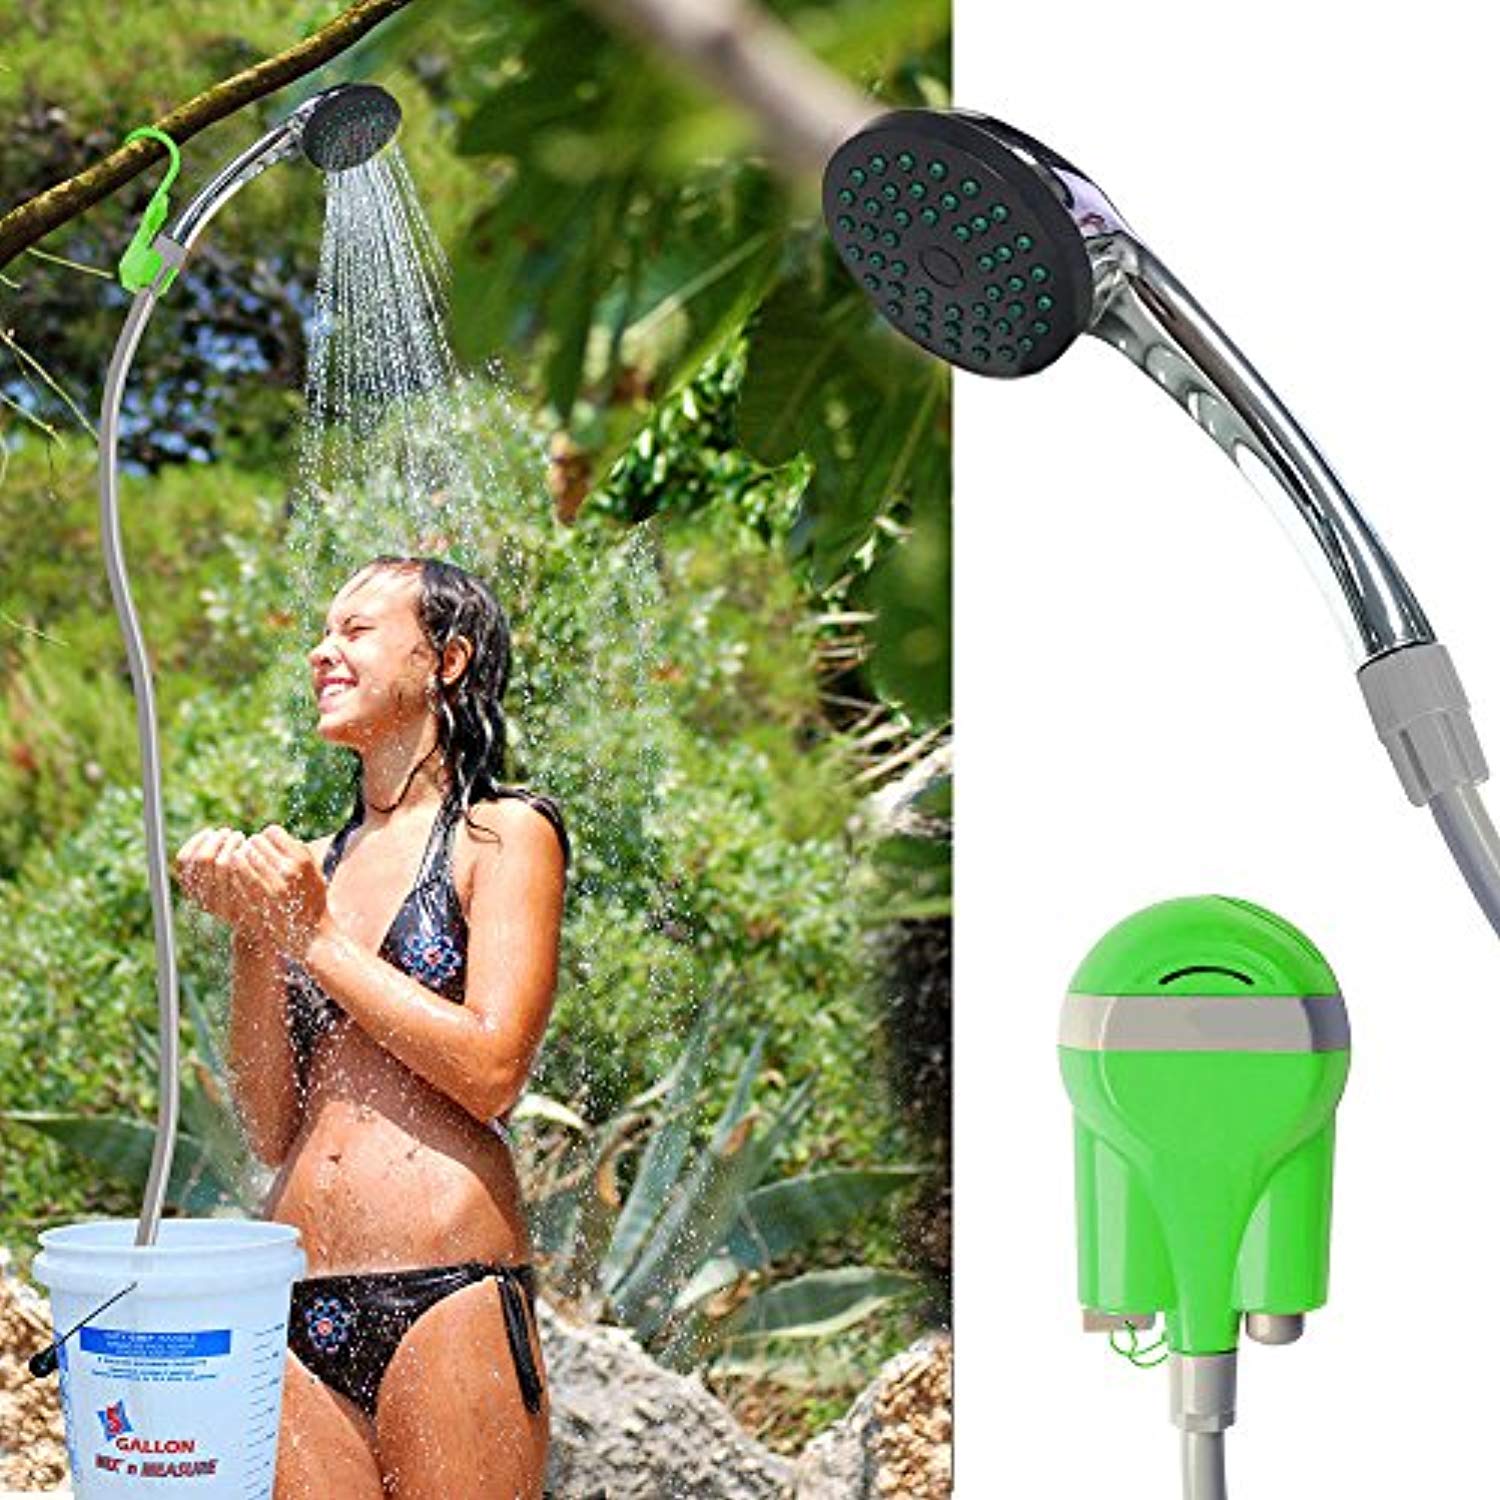 Portable Outdoor Shower, Pumps Water from Bucket Into Steady Shower Stream,Compact Handheld Rechargeable Camping Showerhead,Pumps Water from Bucket Into Steady, Gentle Shower Stream,USB Charging Plug